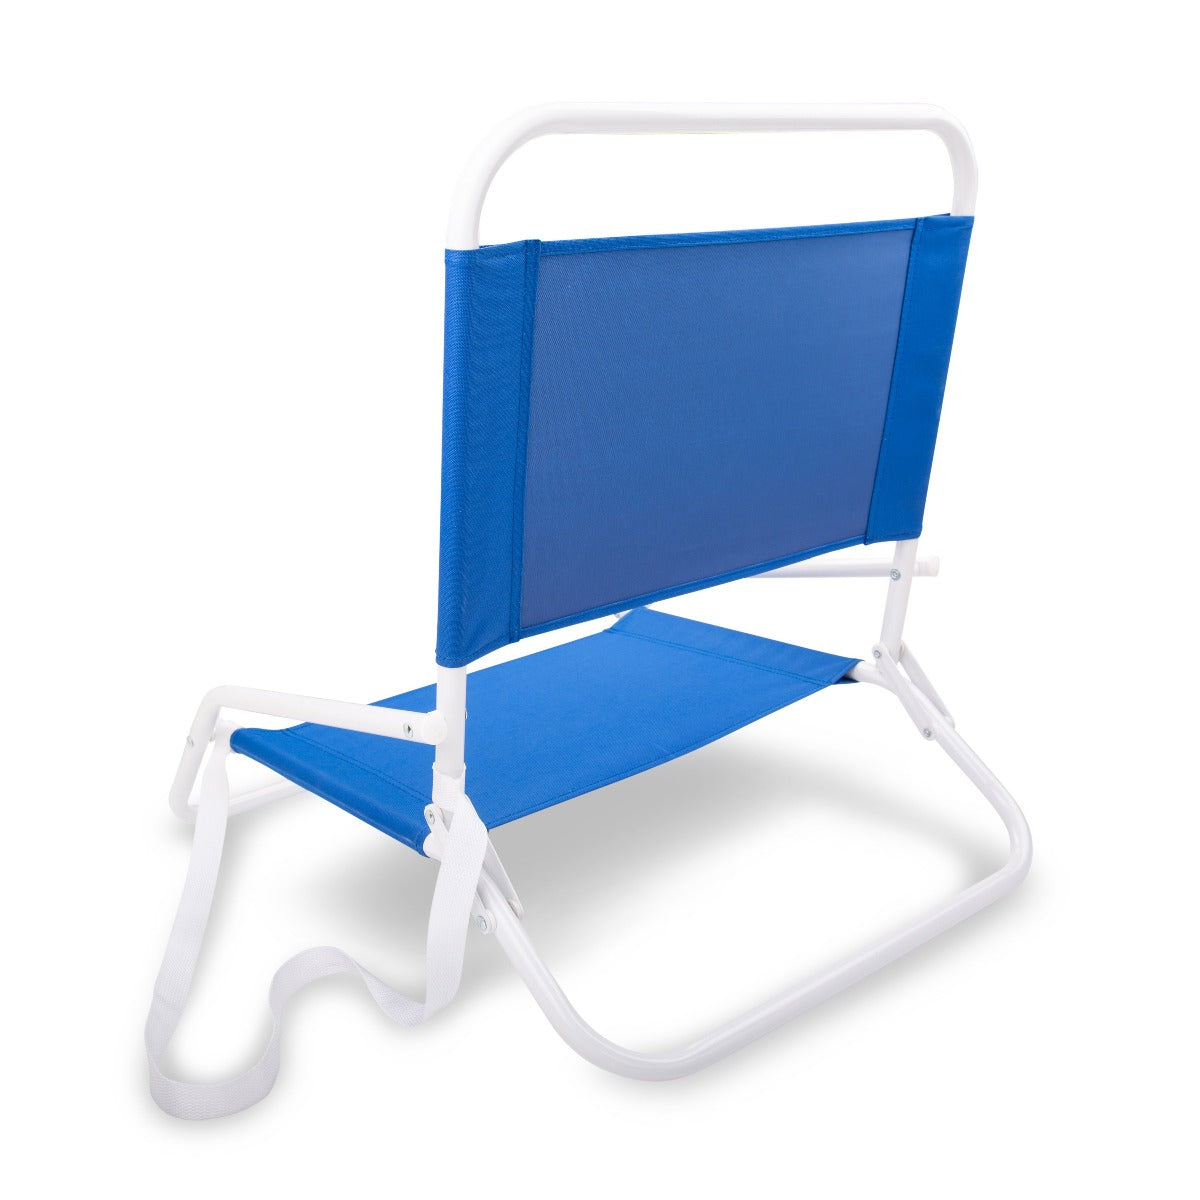 Low Profile Beach Chair - 2 Pack